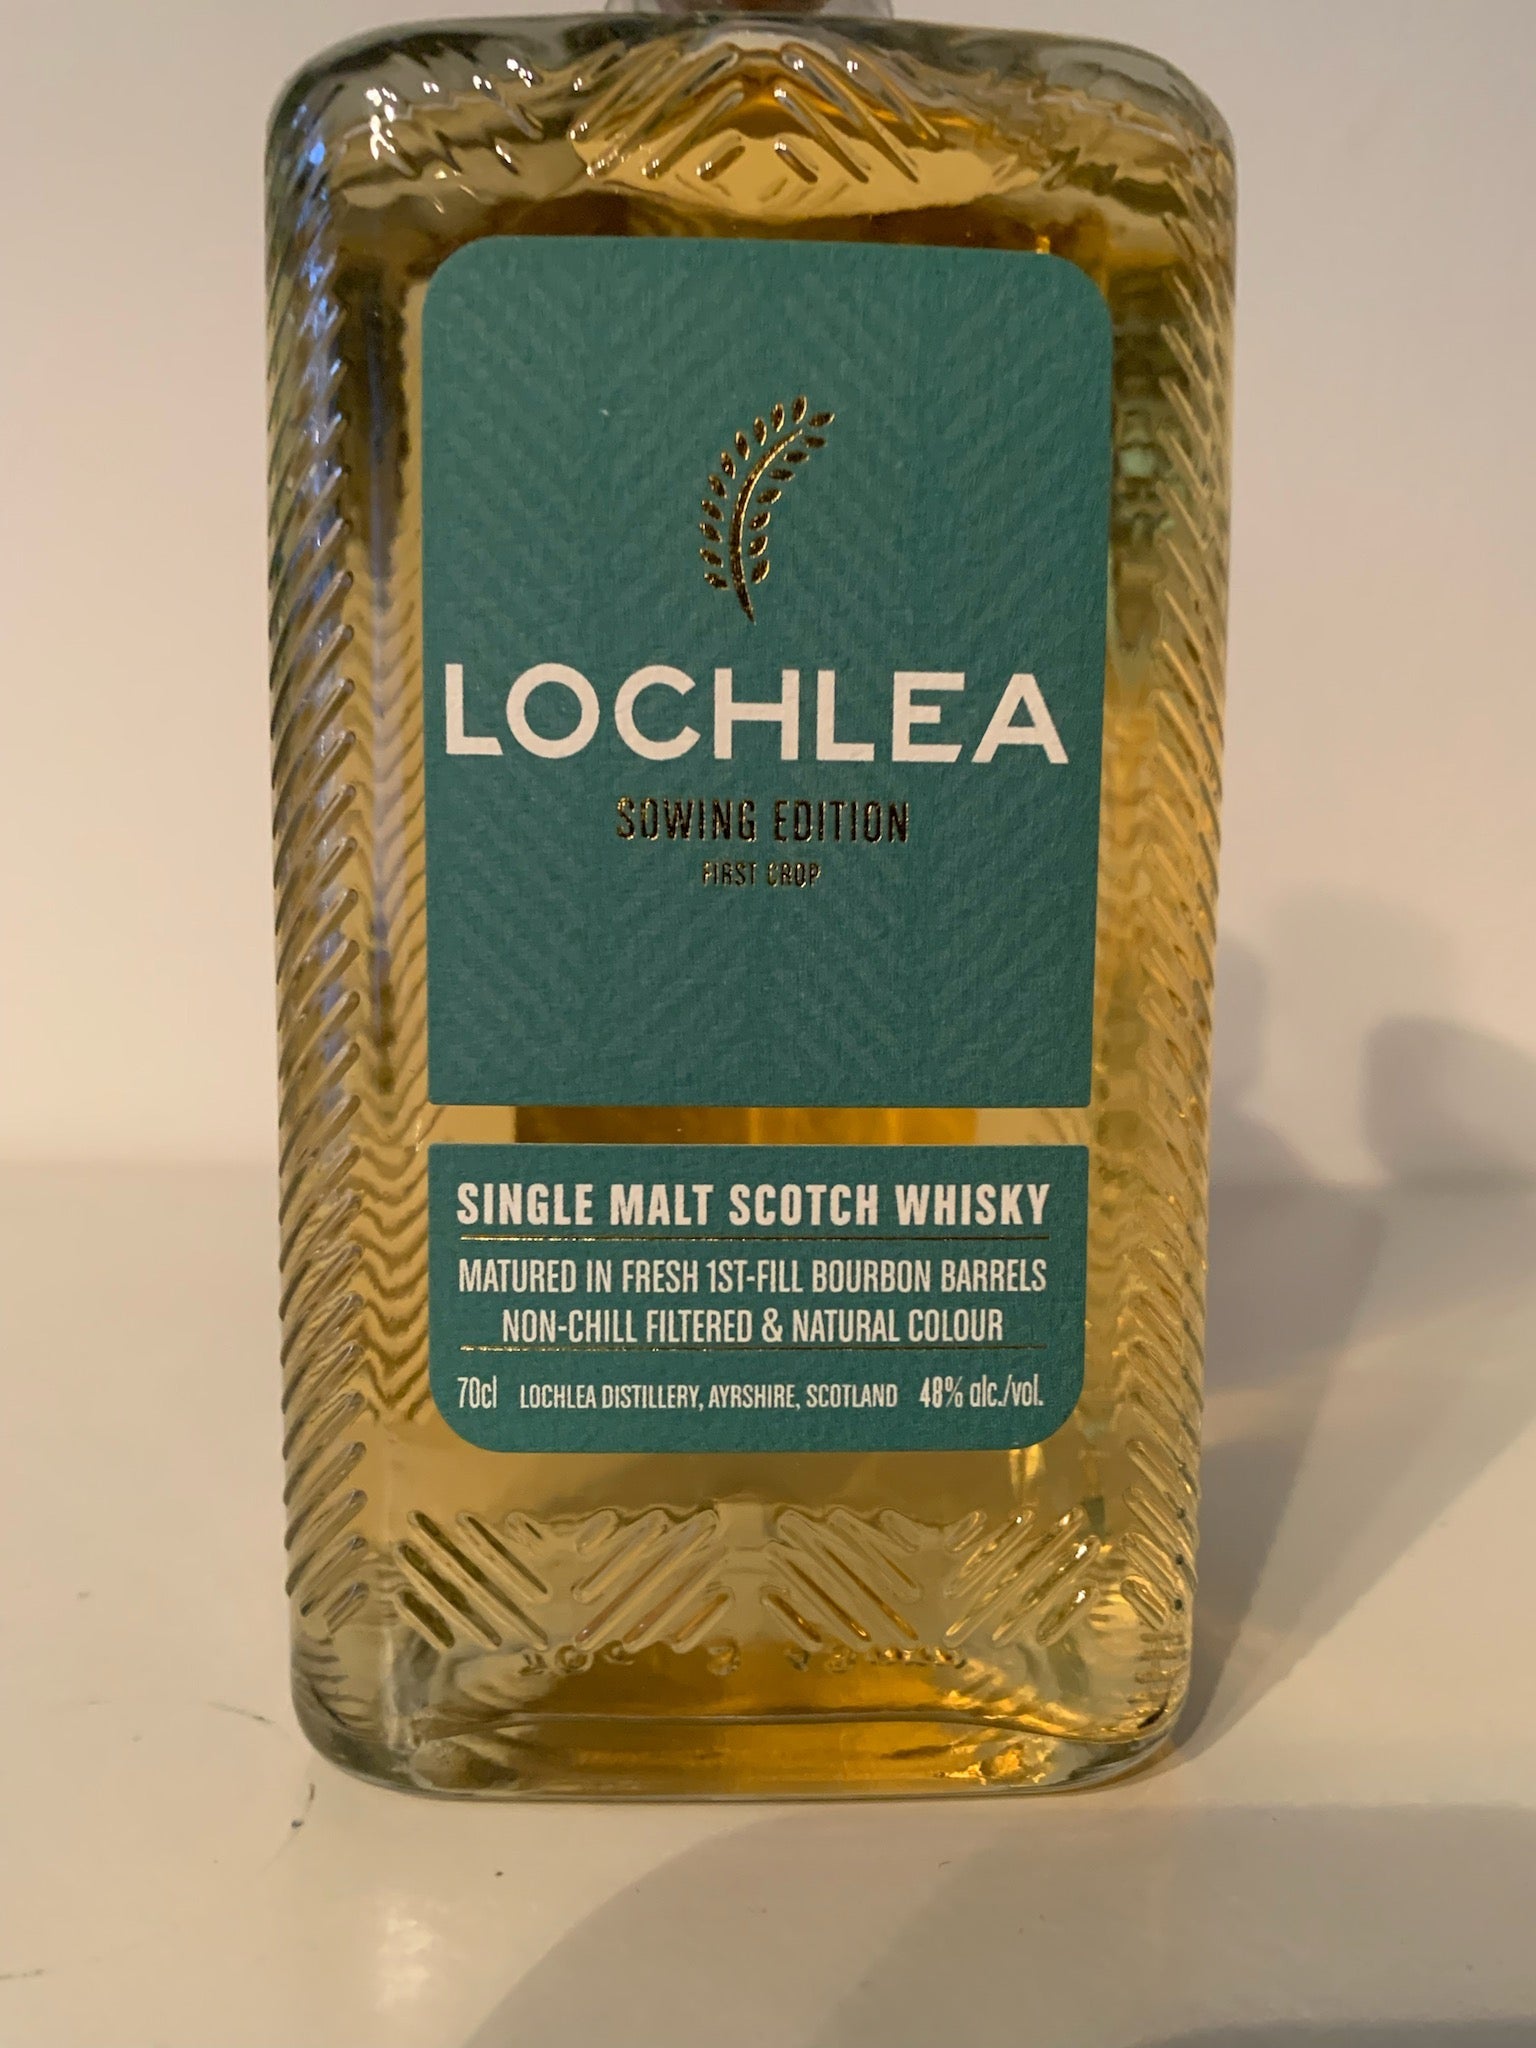 Lochlea “Sowing Edition” Second Release 2022 Whisky 48% / 70 CL.